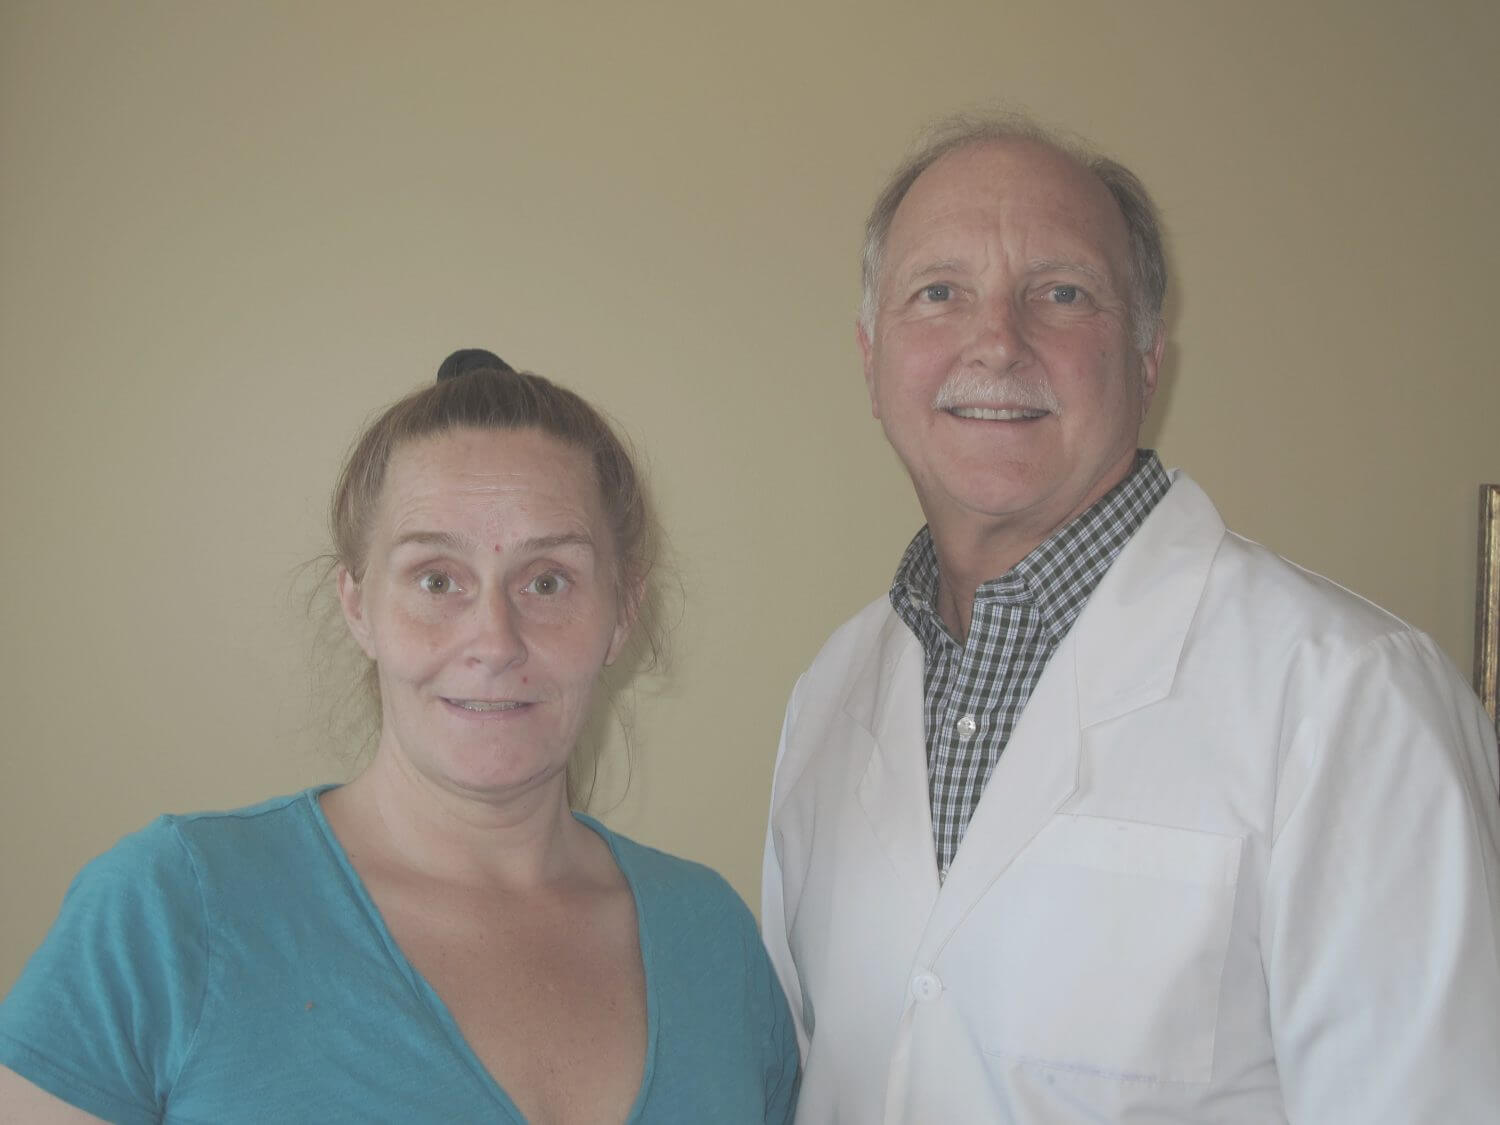 DLN Success Story – DDS Helps Washington Resident With Much Needed Dental Care